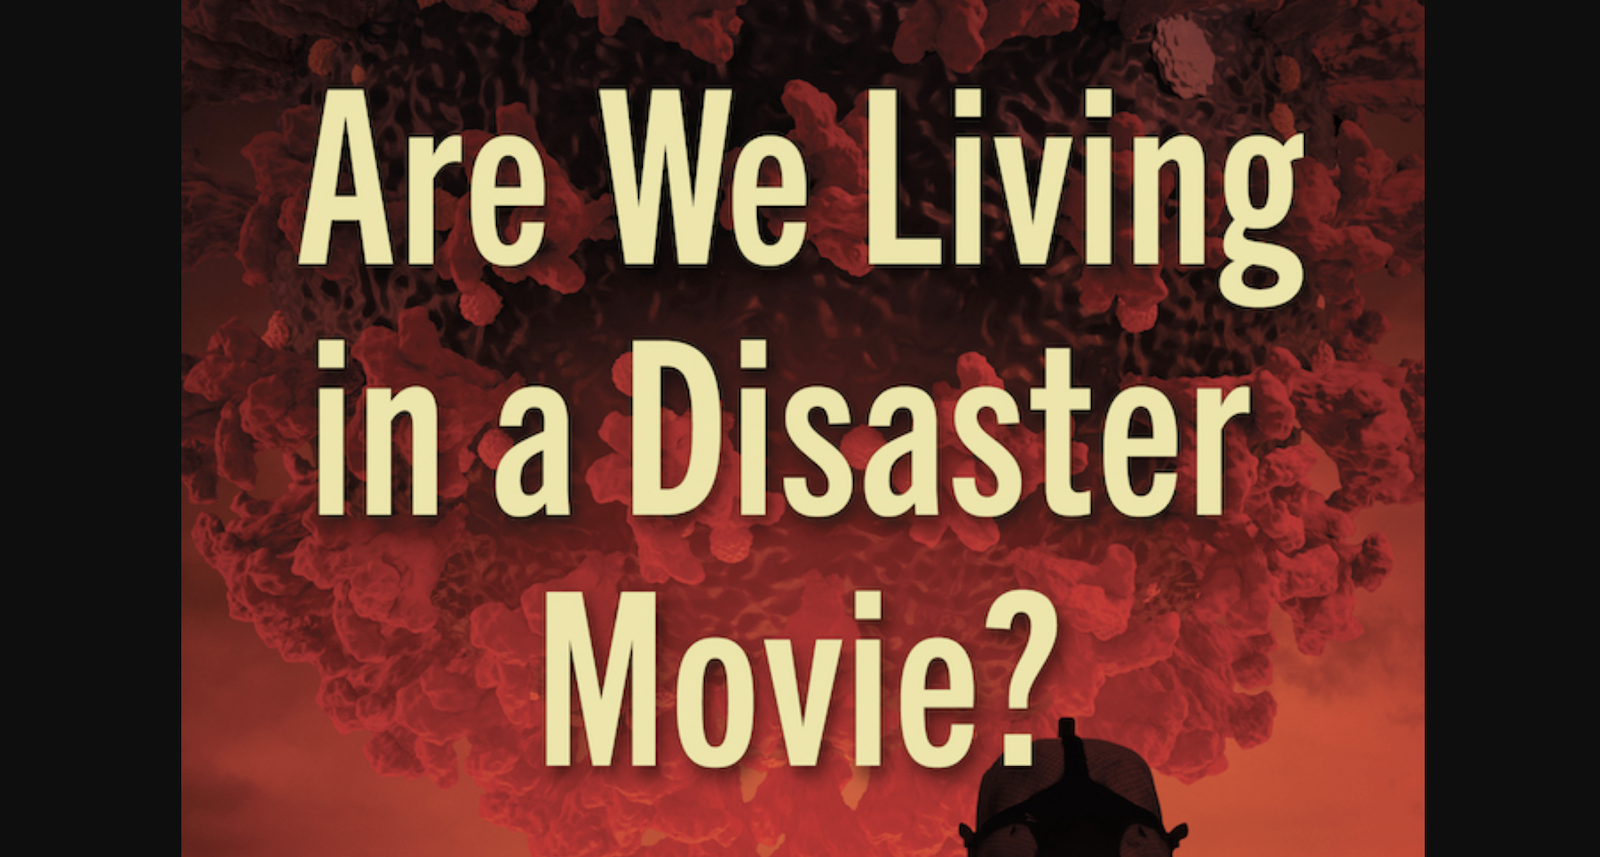 Exclusive Excerpt From “Are We Living in a Disaster Movie?”